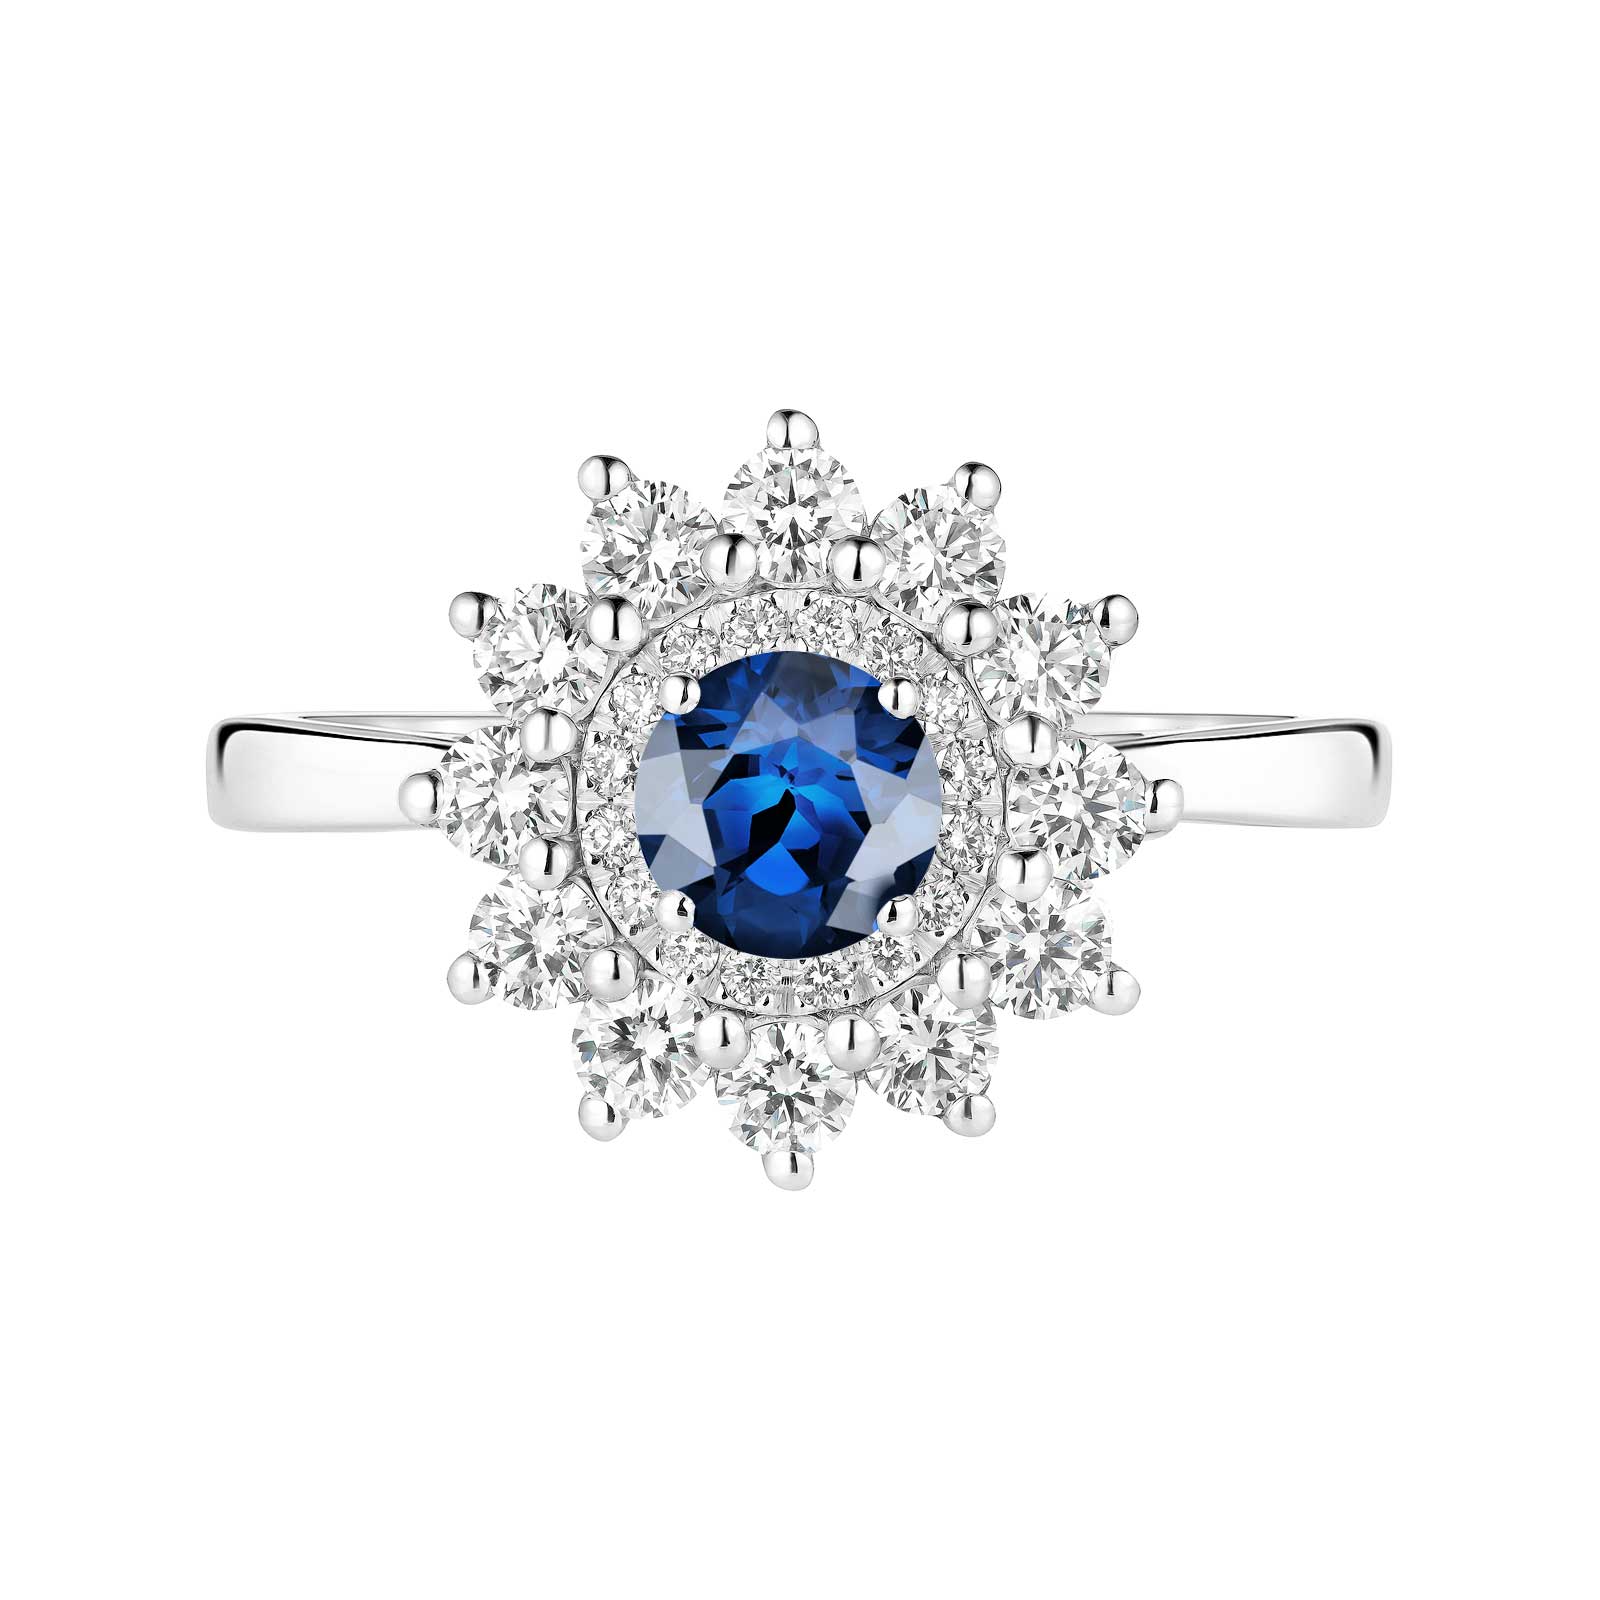 Ring White gold Sapphire and diamonds Lefkos 5 mm 1